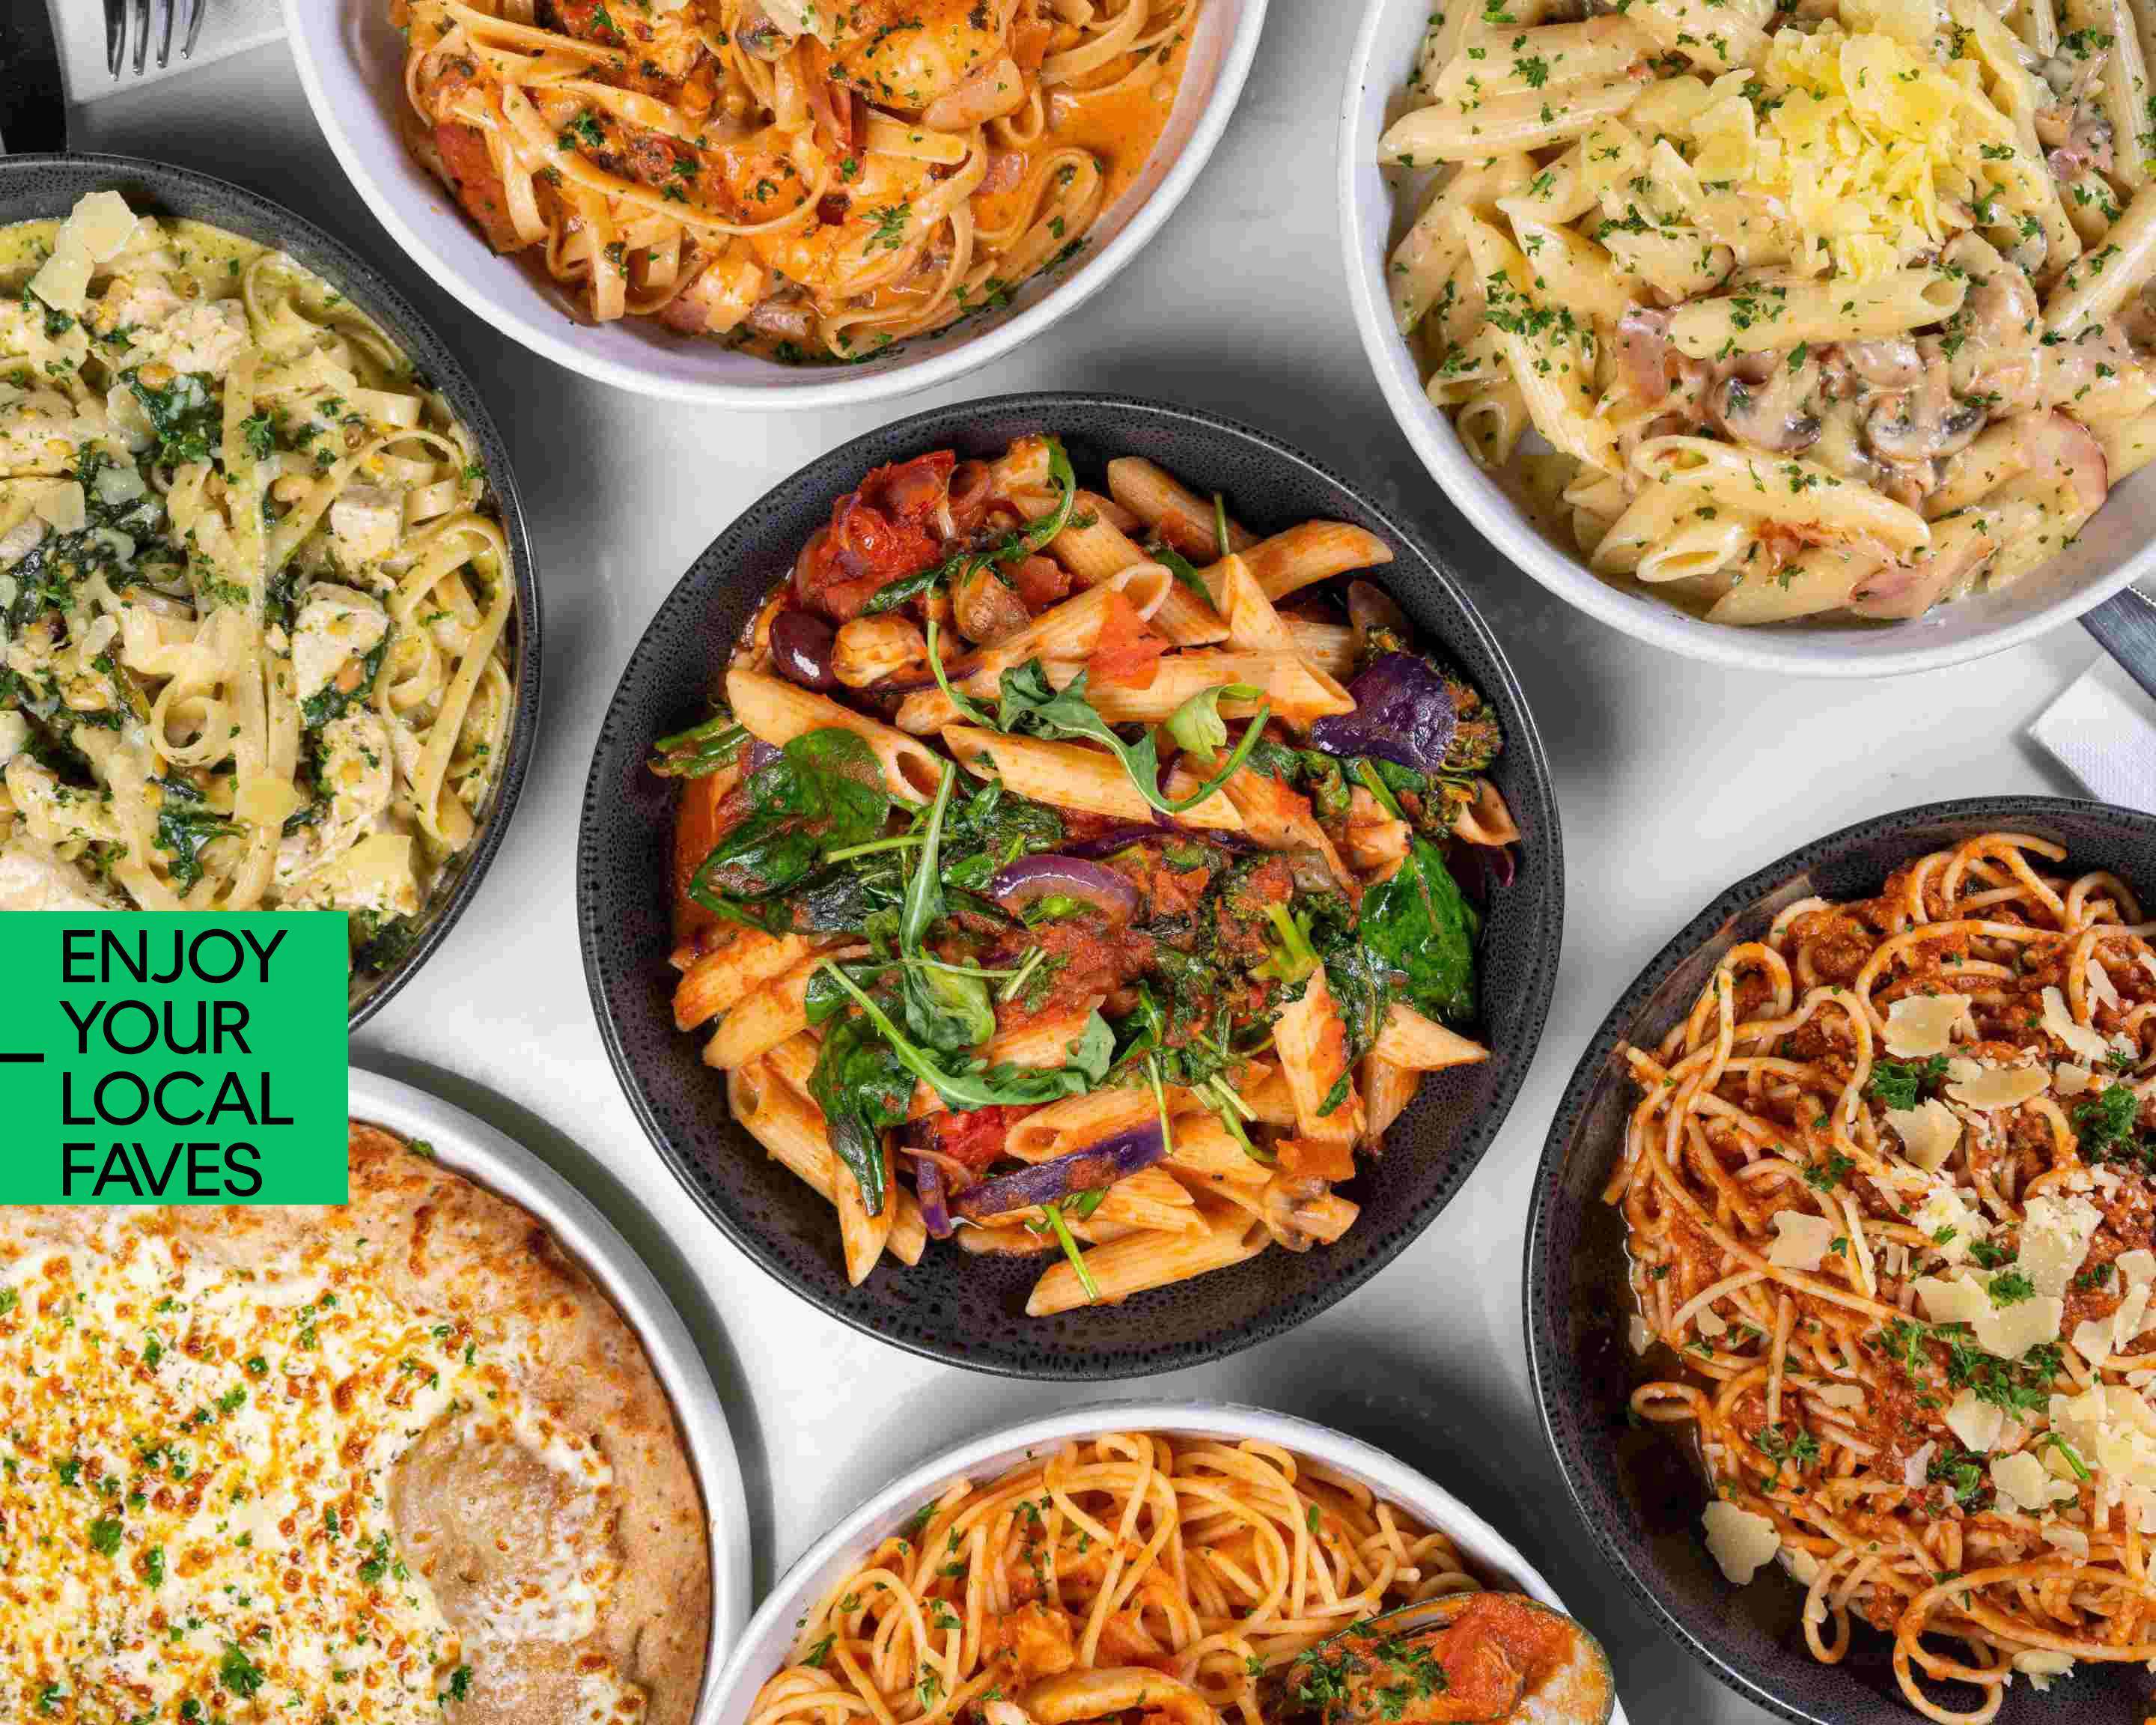 Pasta King Menu Takeout in Adelaide | Delivery Menu & Prices | Uber Eats